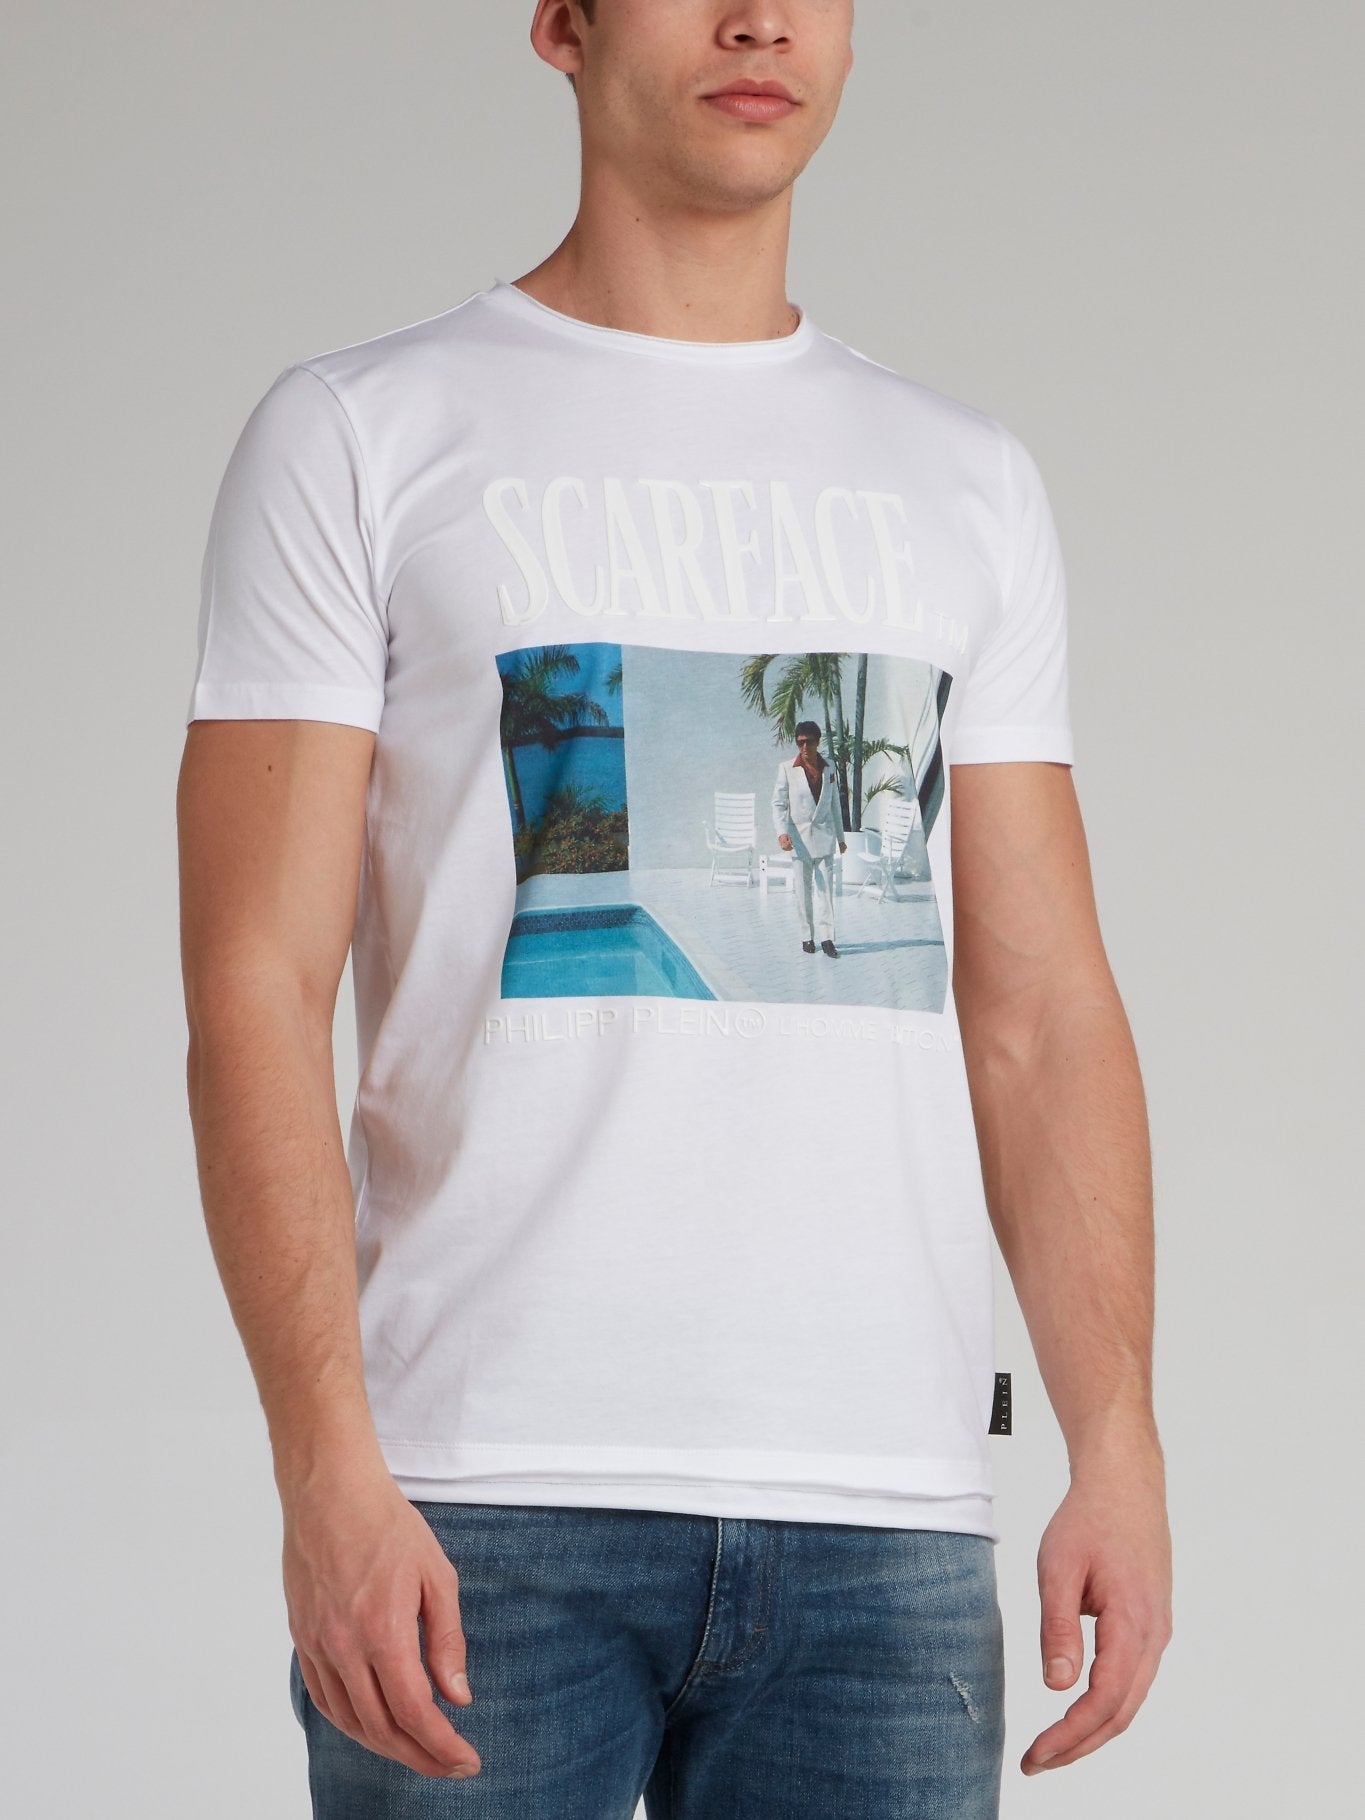 Scarface White Graphic T-Shirt